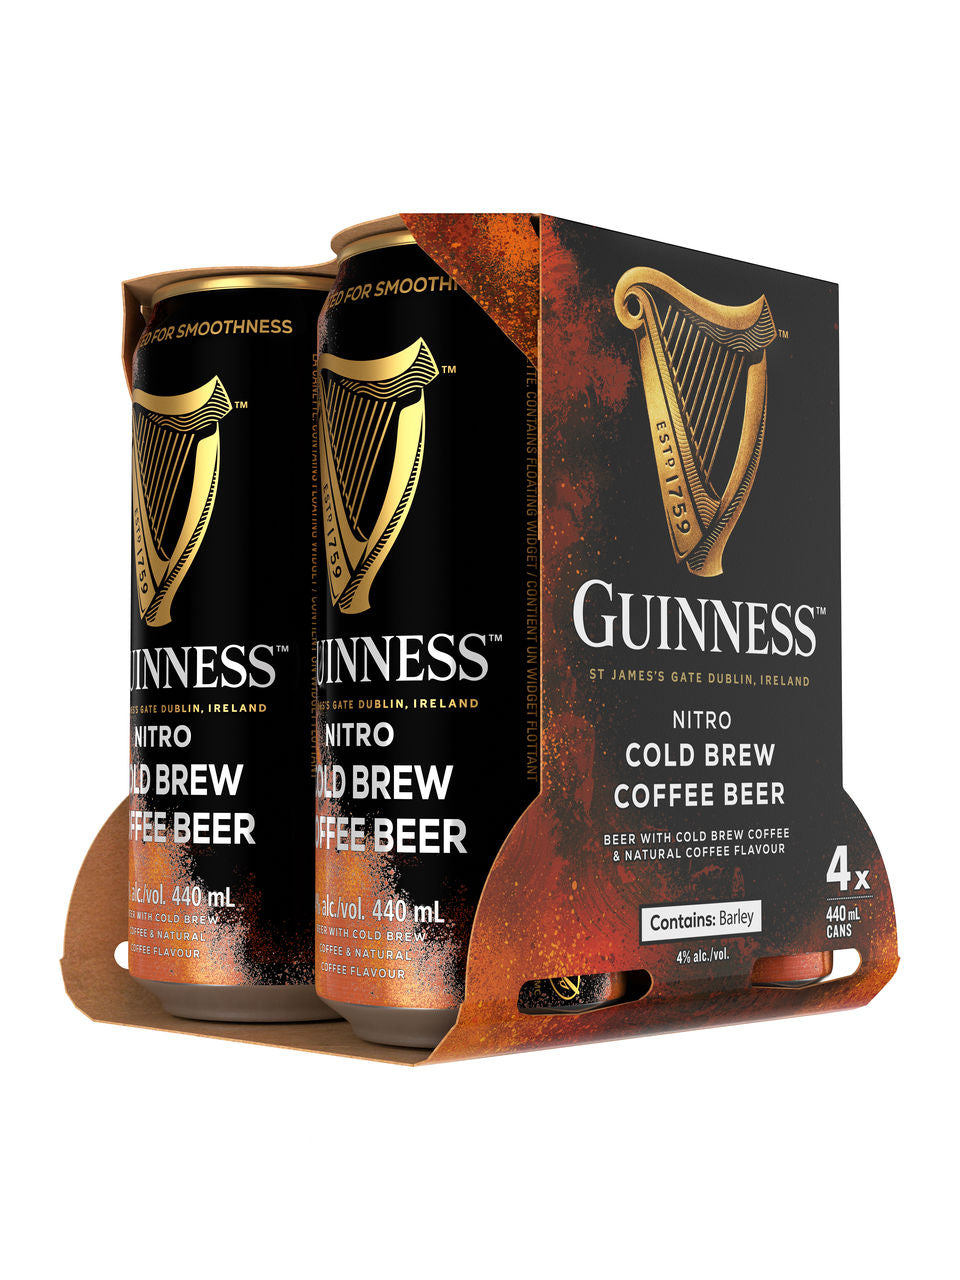 Guinness Nitro Cold Brew Coffee Beer 4 x 440 ml can